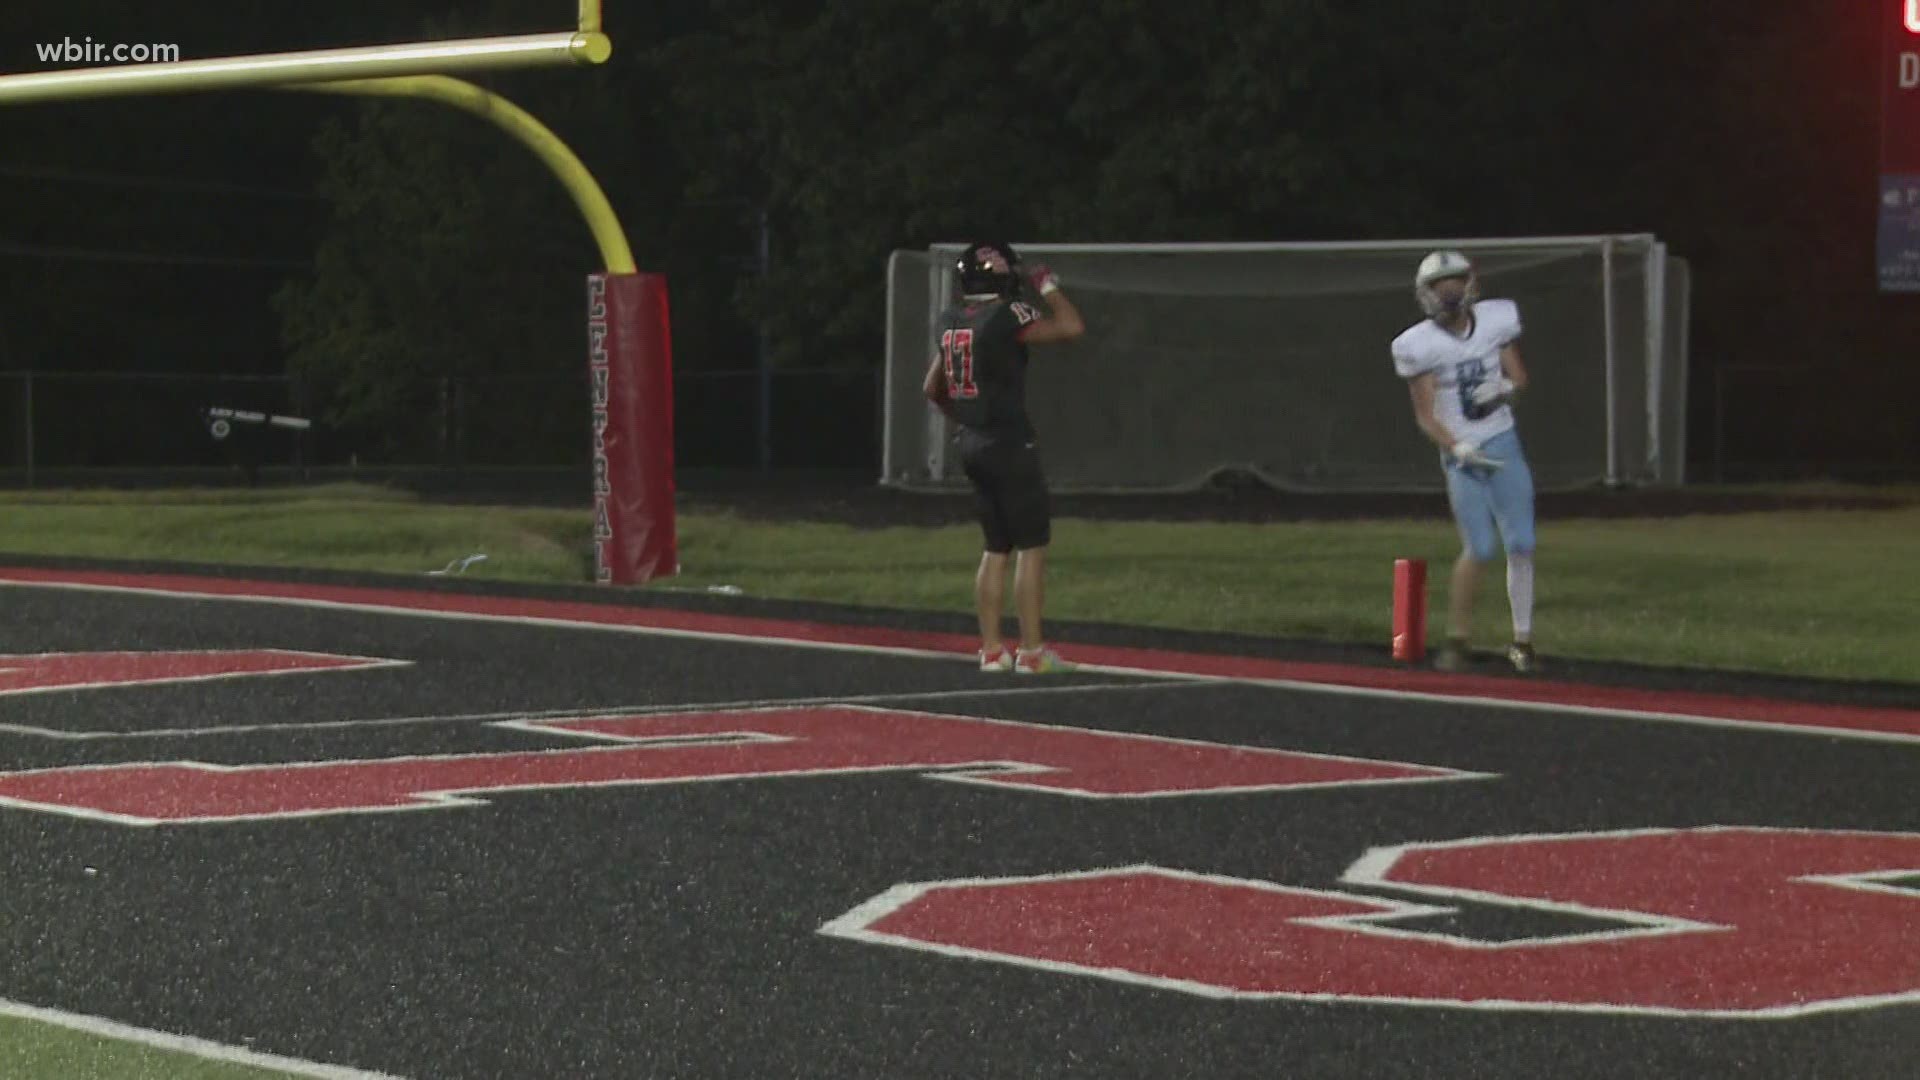 Hardin Valley jumps out early, but Central pulls away for the win.